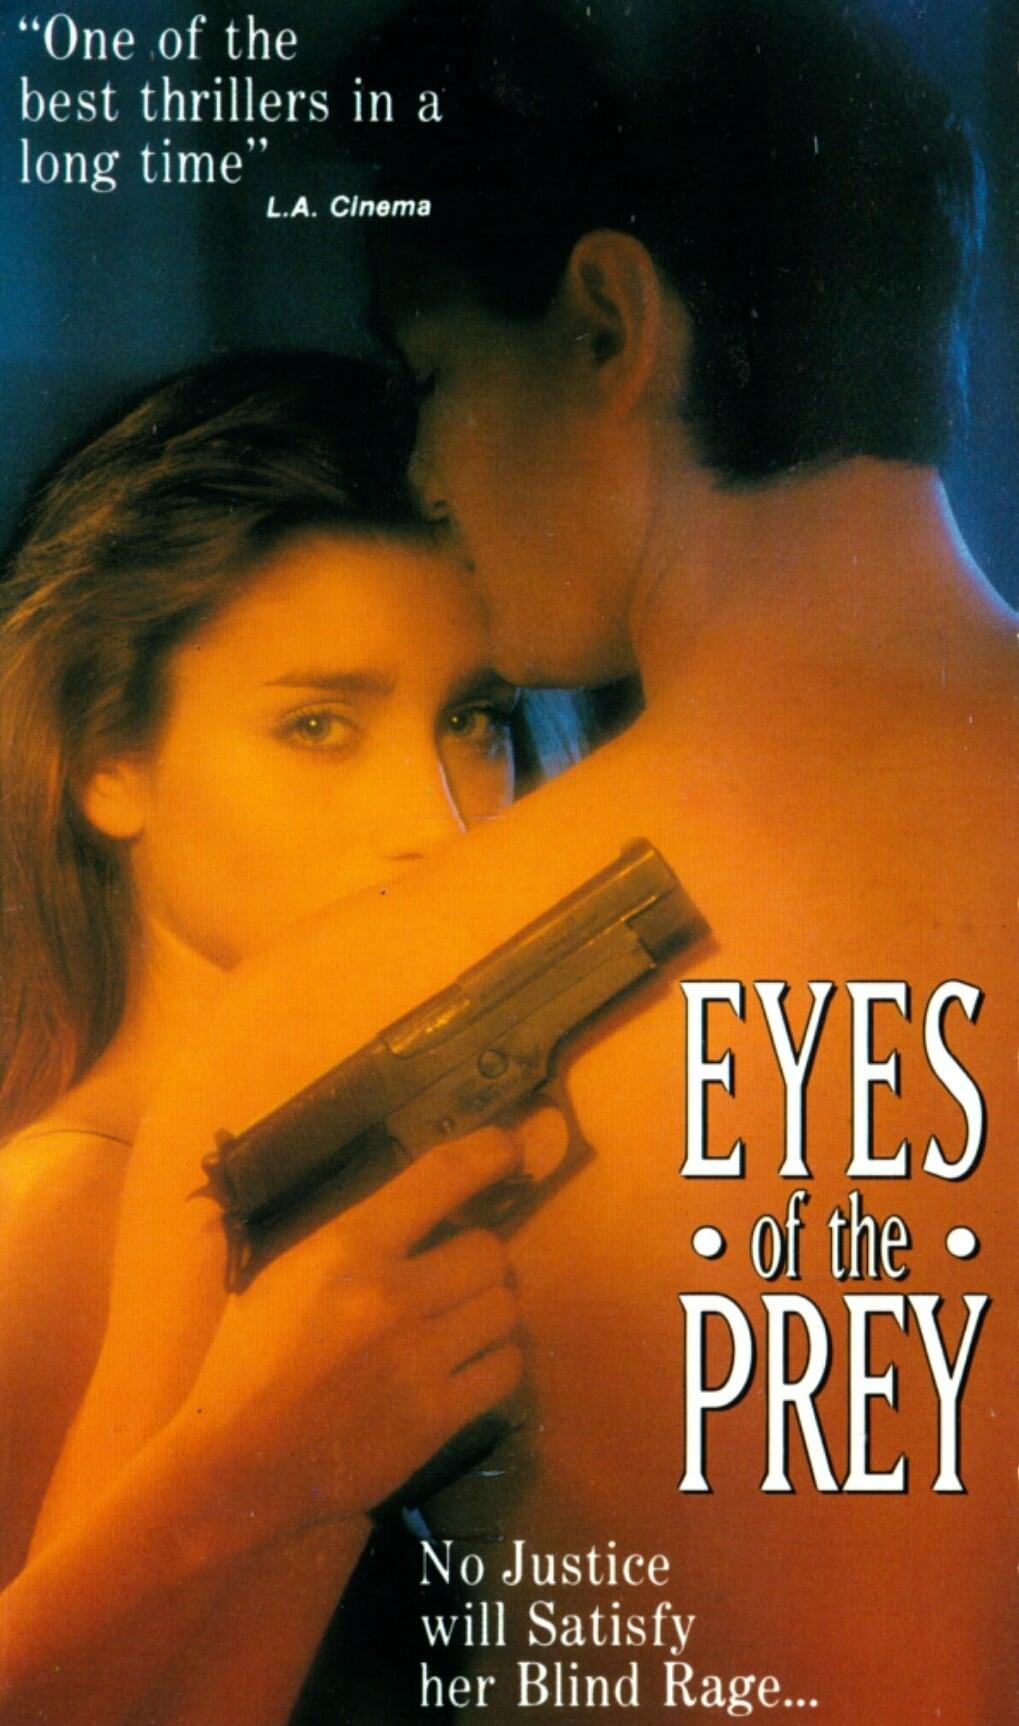 Eyes of the Prey poster